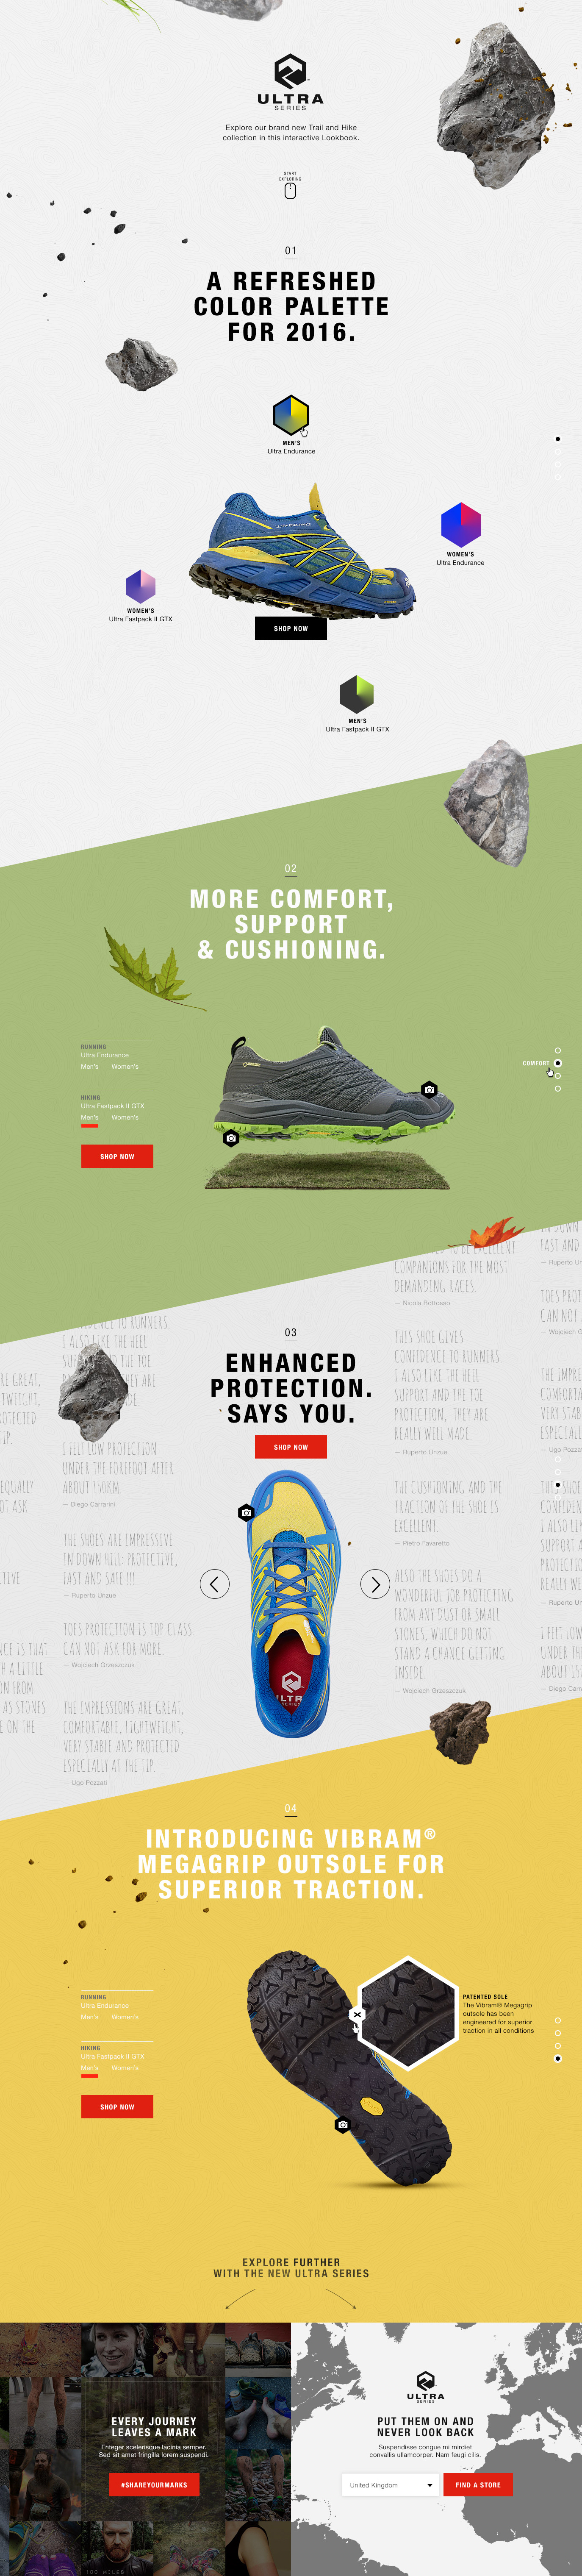 The North Face Ultra Shoes – Microsite